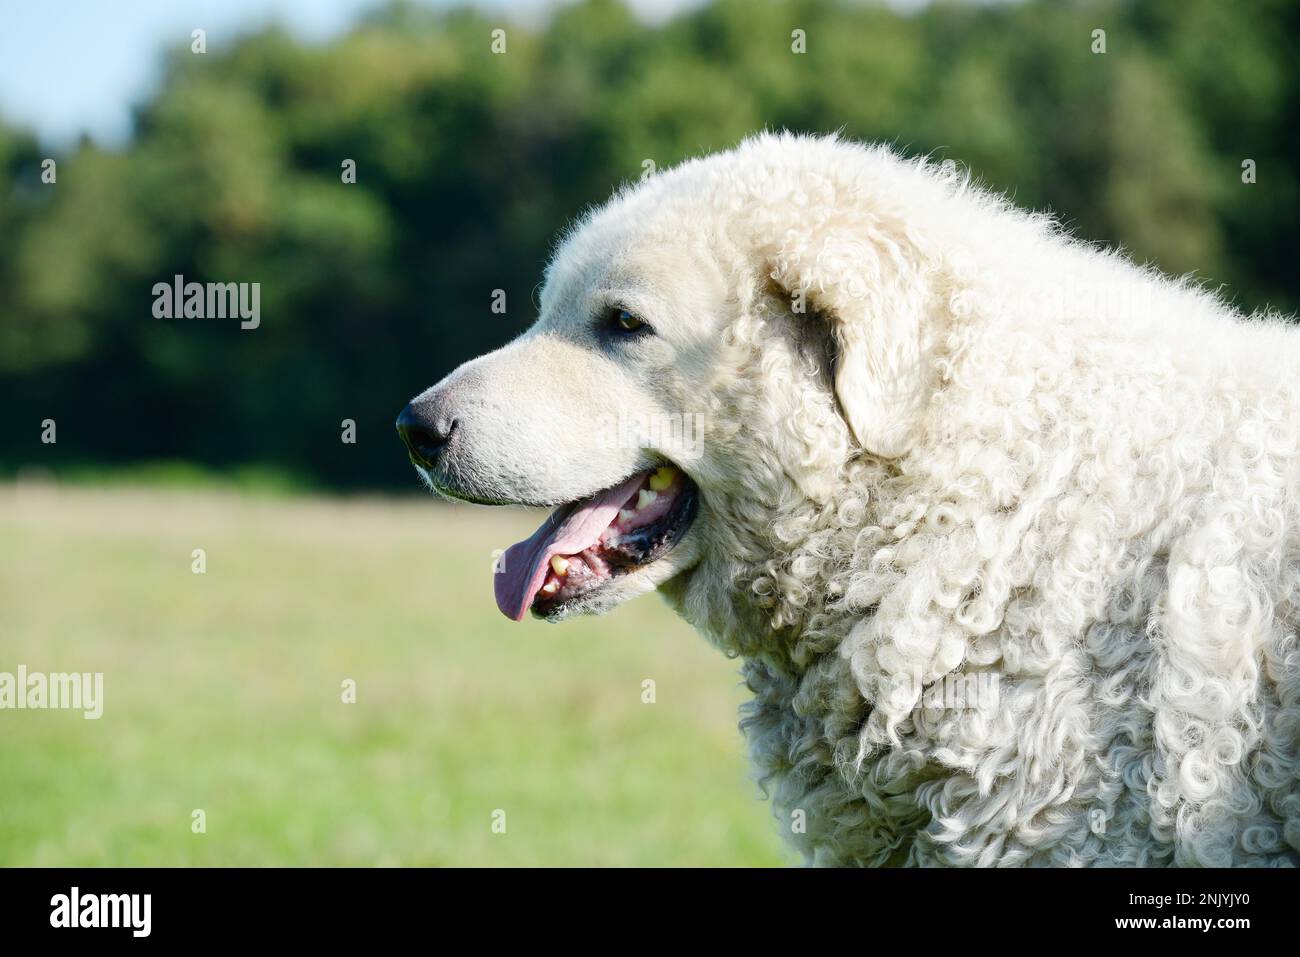 Head from the Dog Kuvasz. The livestock guardian dog looking on the pasture. Stock Photo